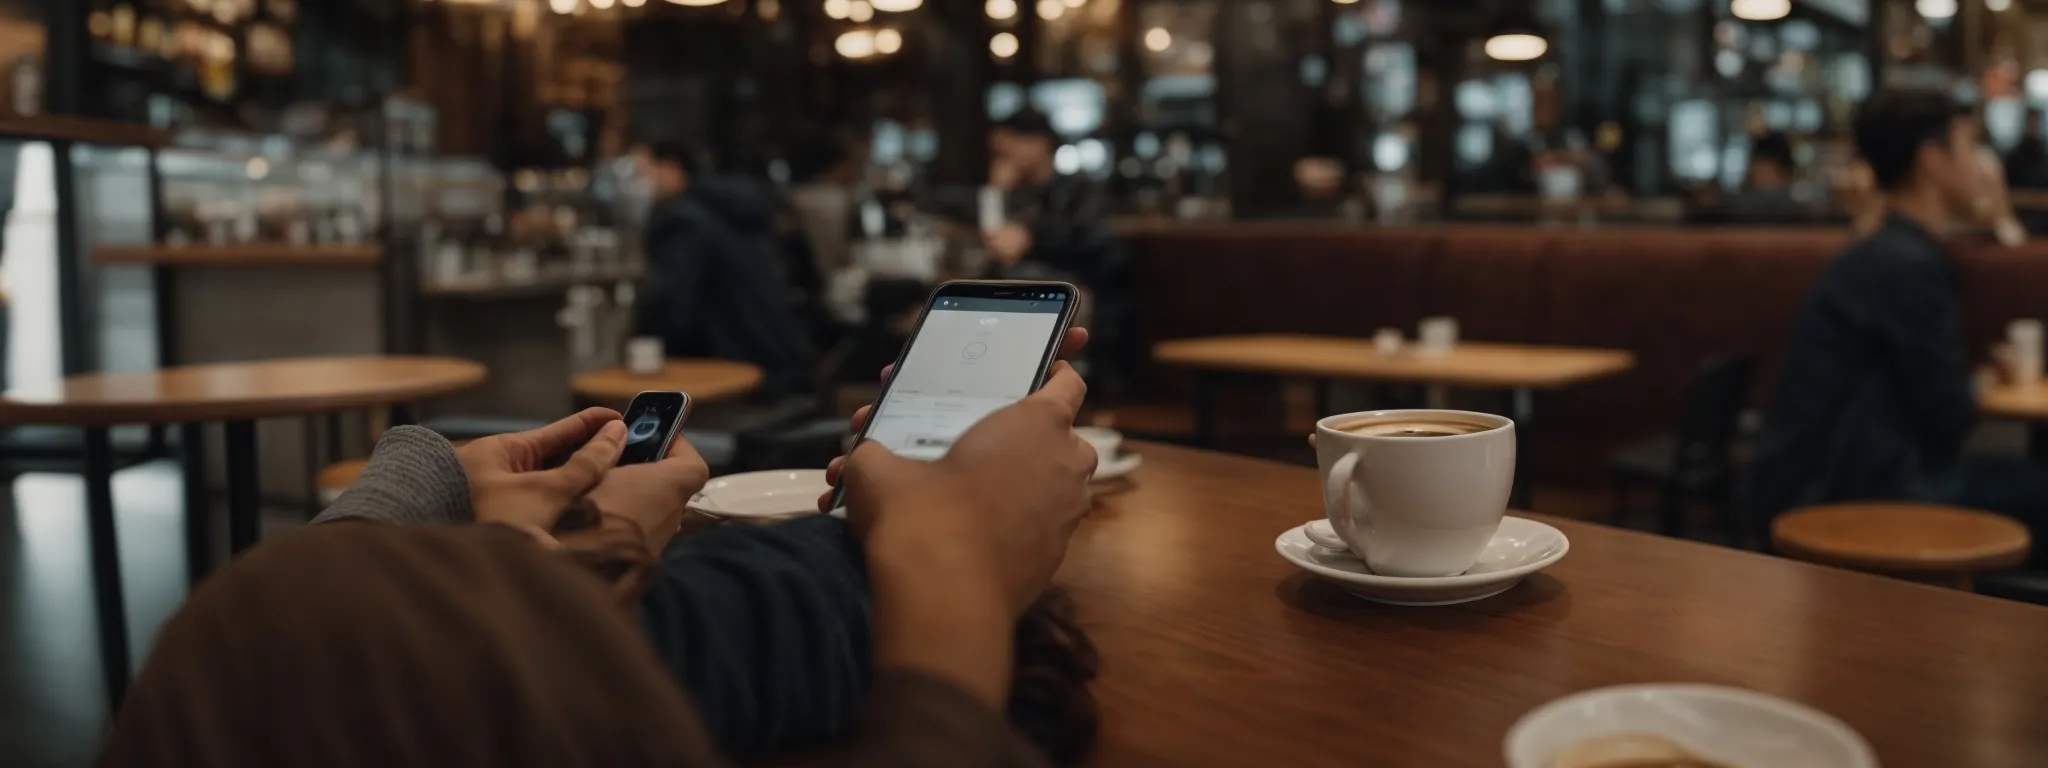 a person swiping smoothly through an interactive website on a smartphone amidst a bustling coffee shop.